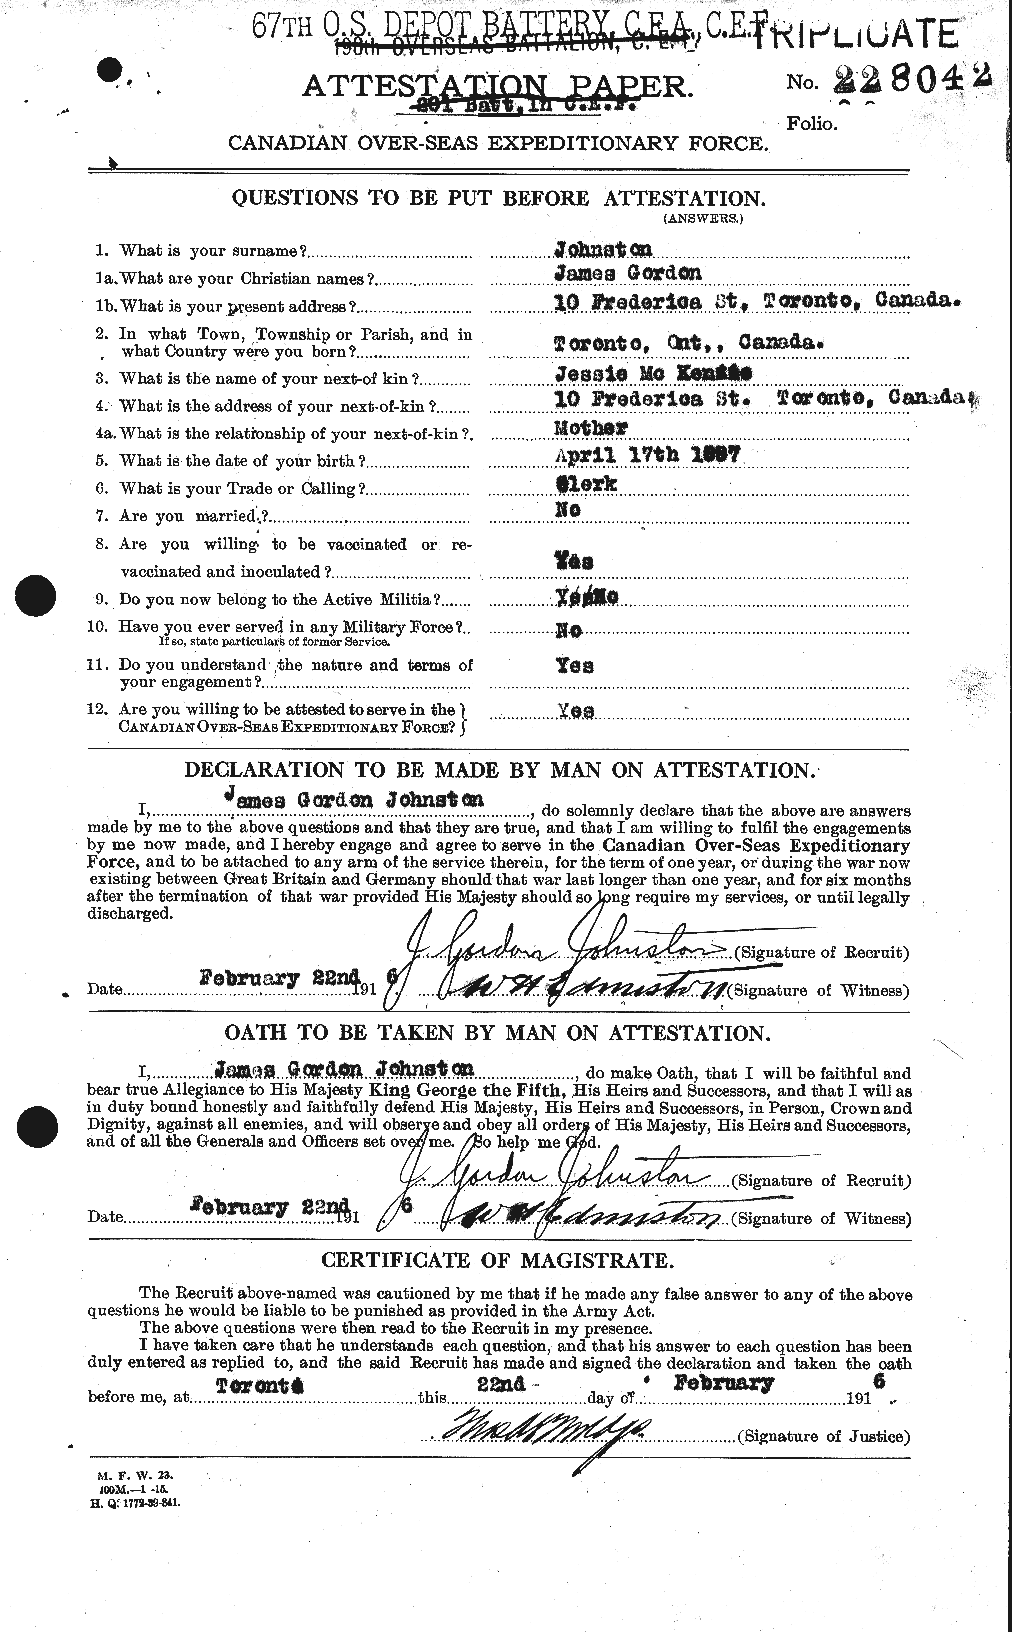 Personnel Records of the First World War - CEF 422734a